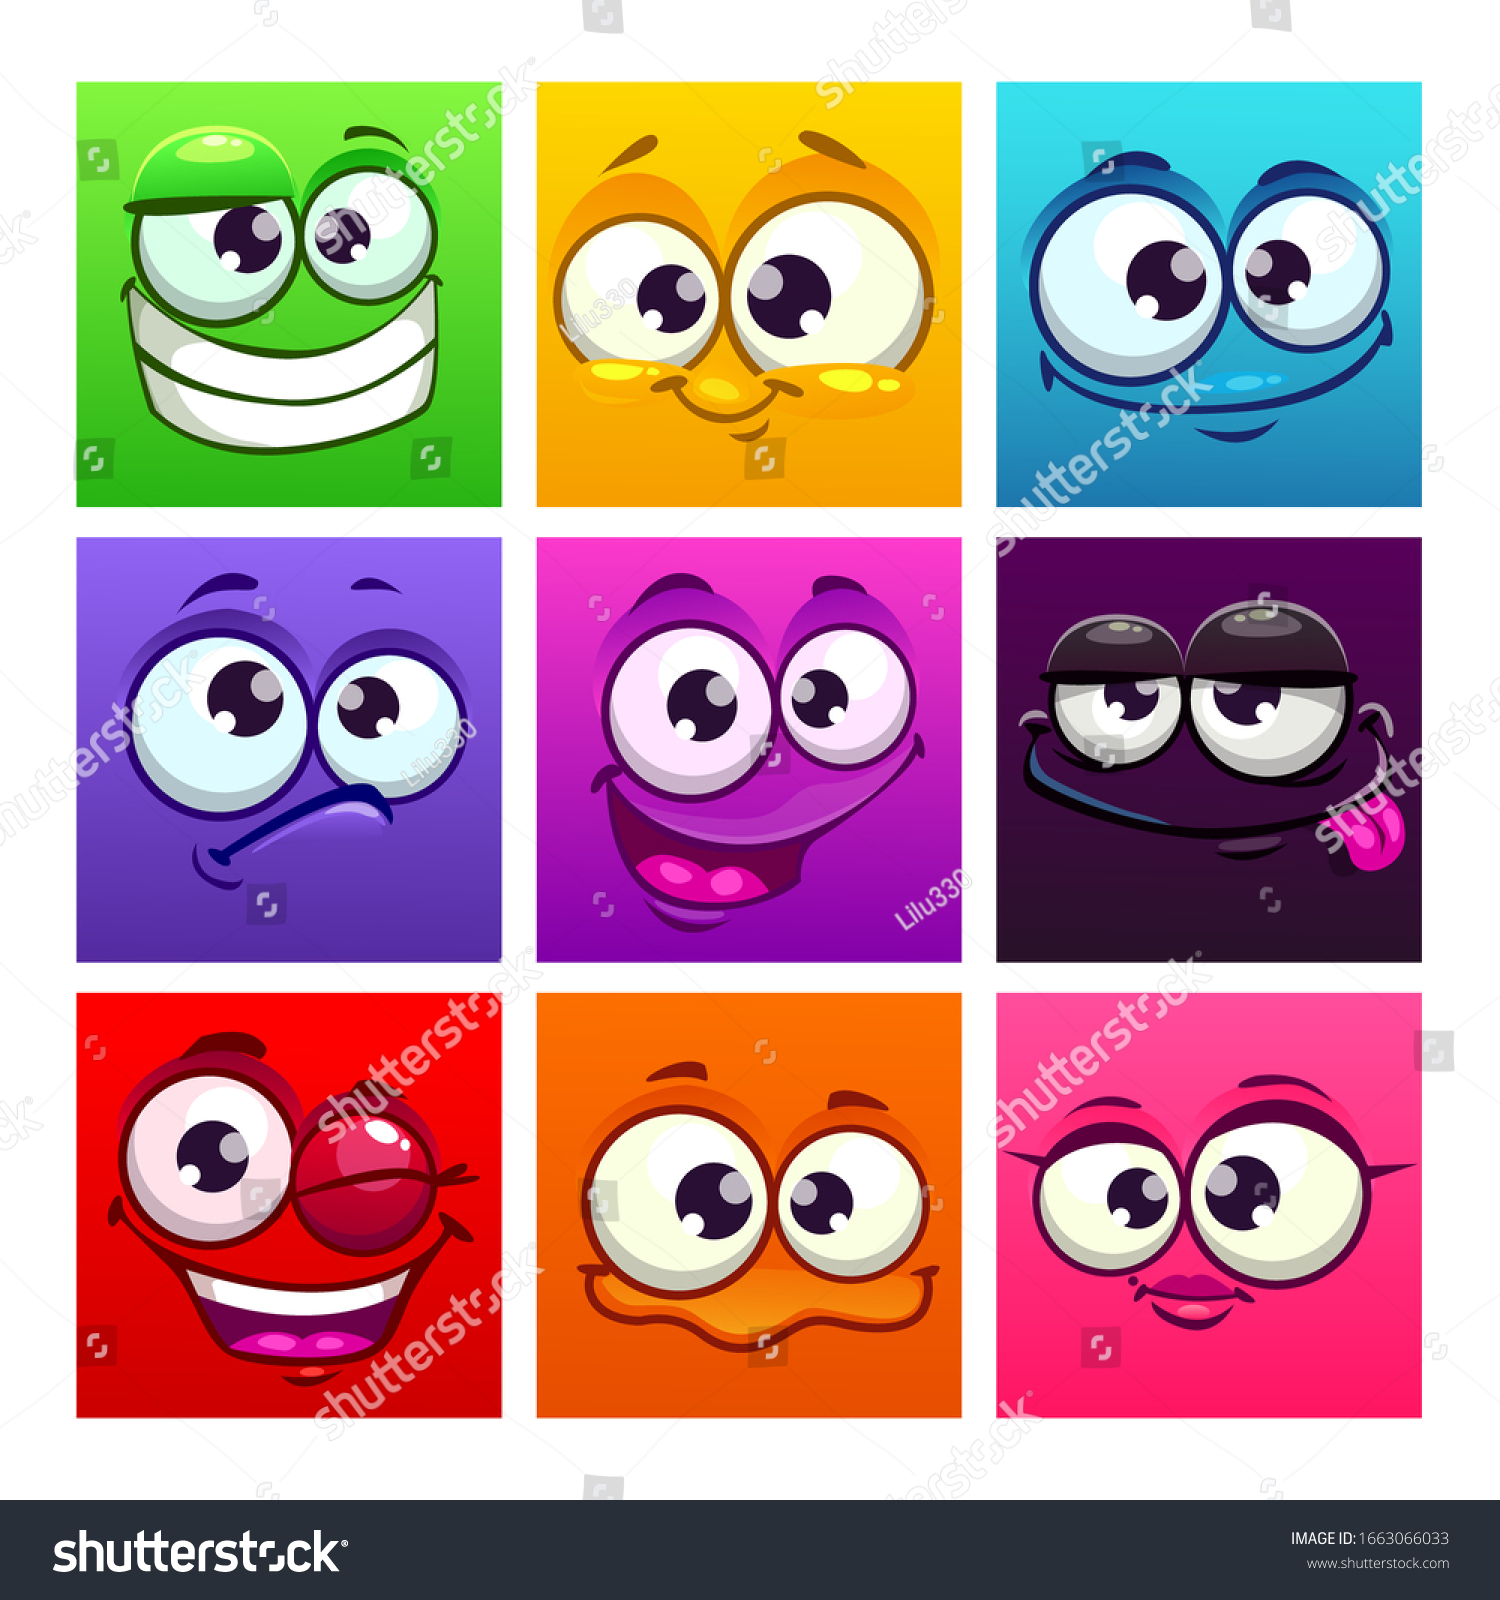 Funny Cartoon Colorful Square Emoji Faces Stock Vector (Royalty Free ...